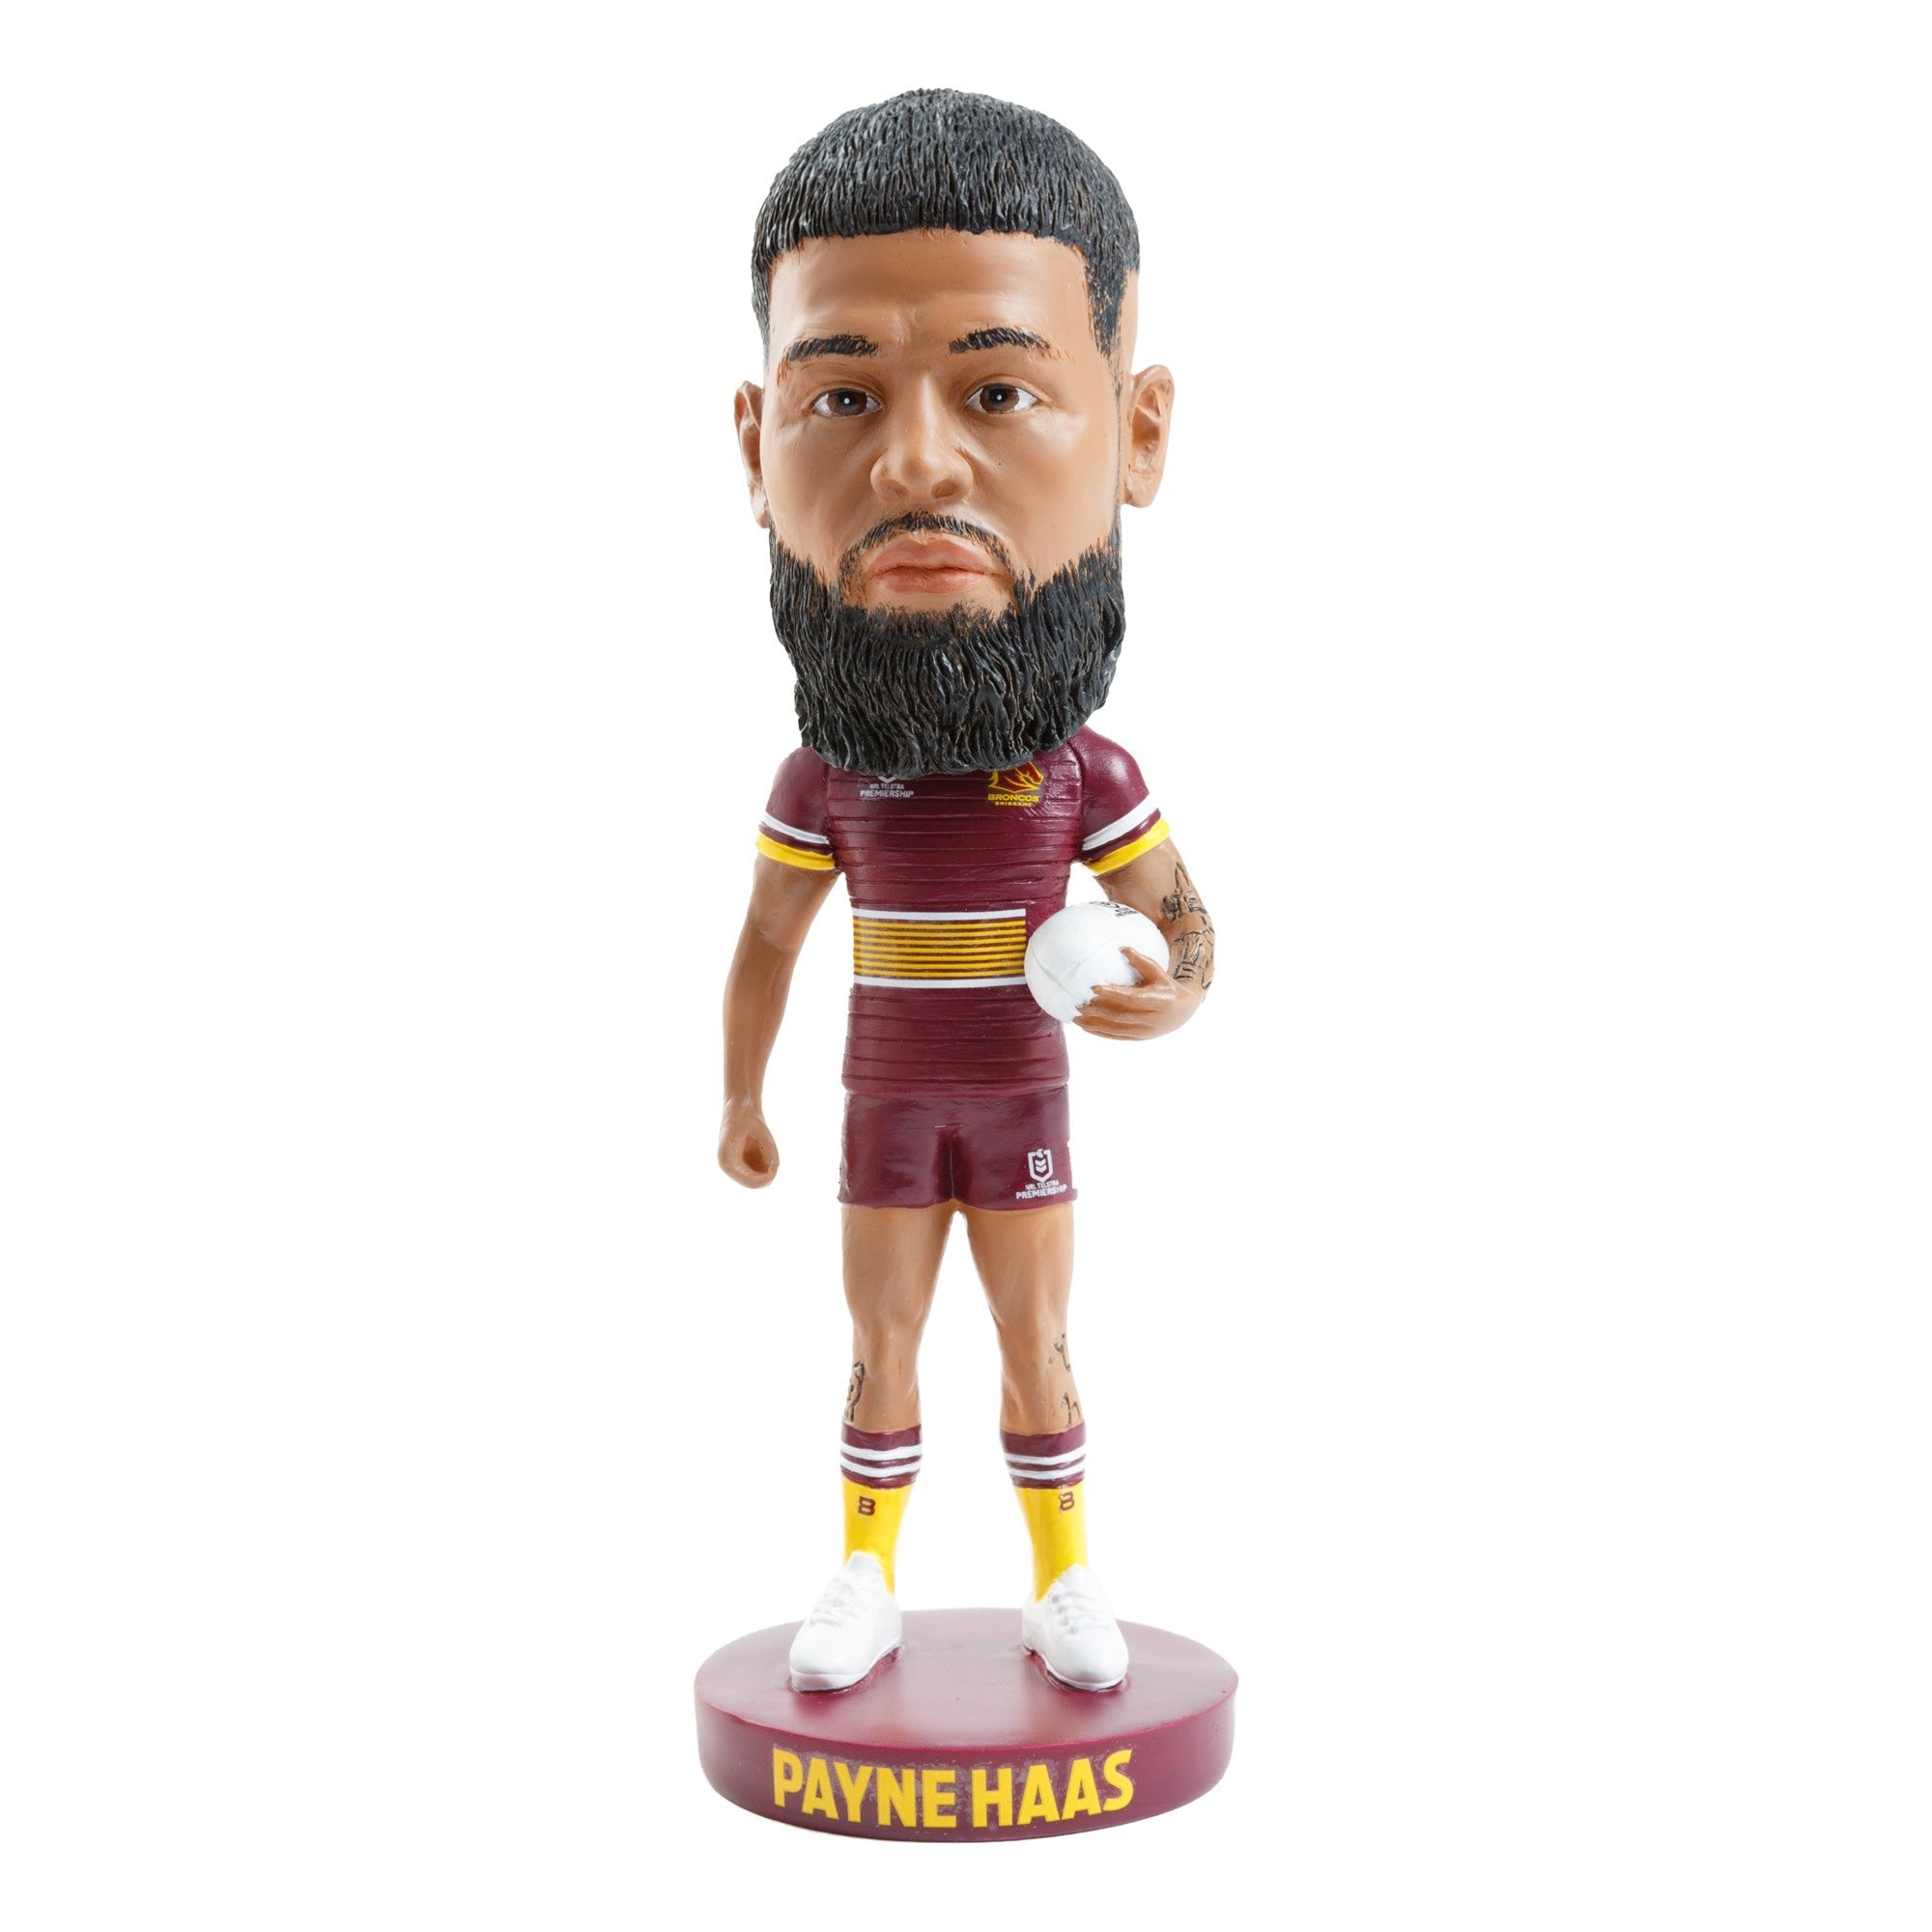 NRL Brisbane Broncos PAYNE HAAS Bobblehead Collectable 18cm tall Statue Gift